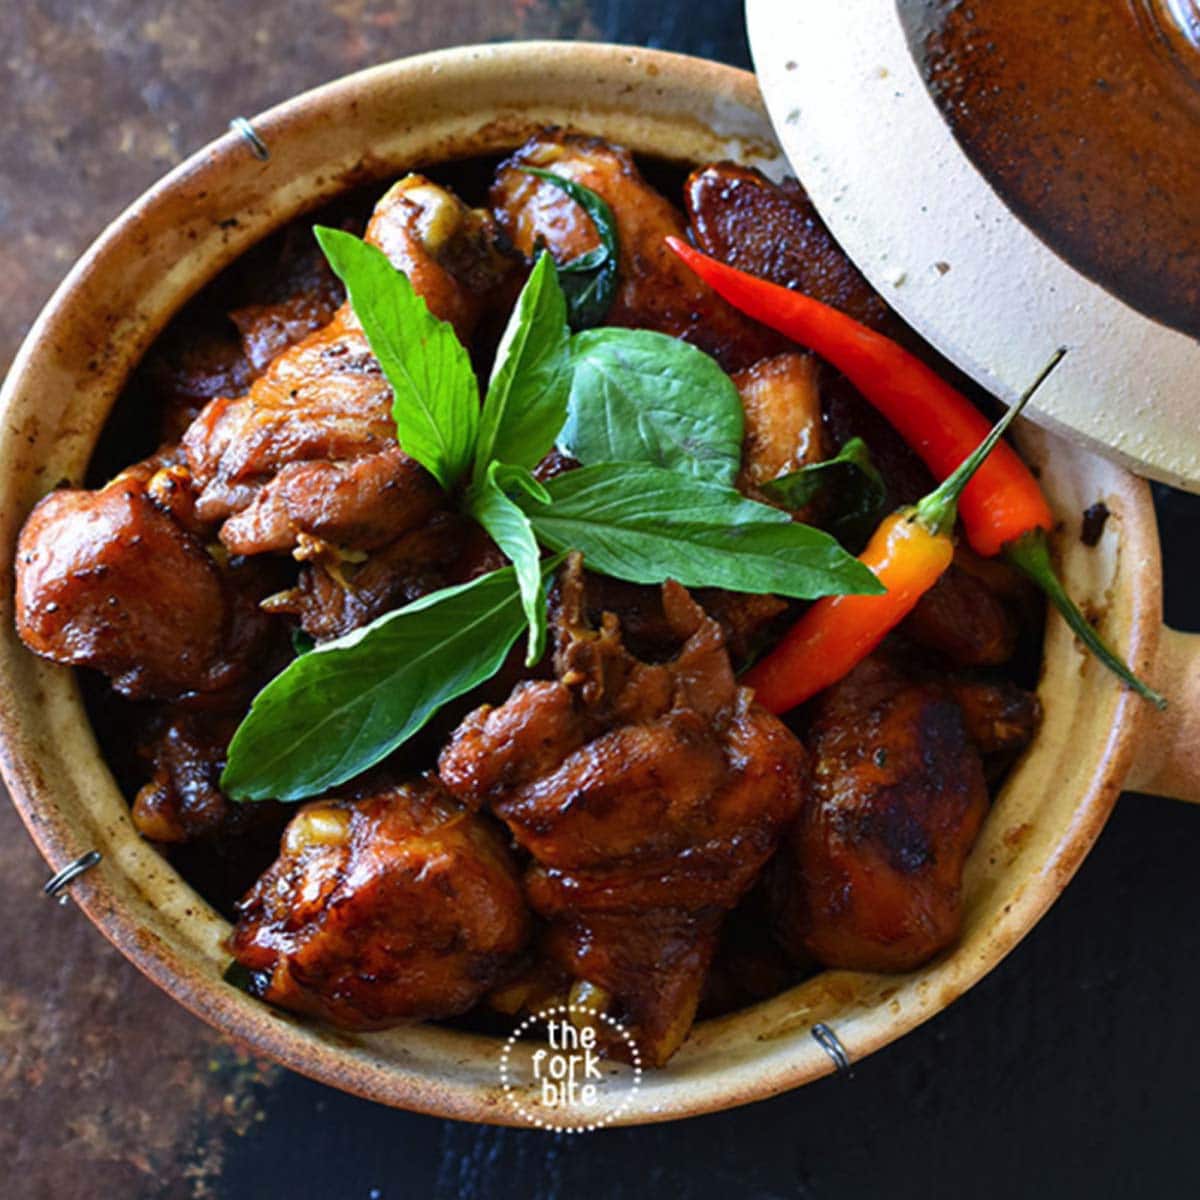 One of my favorites classic Taiwanese dish and it's called 3 Cup Chicken. It's sweet and savory at the same time with a hint of spice and the aroma of basil leaves.